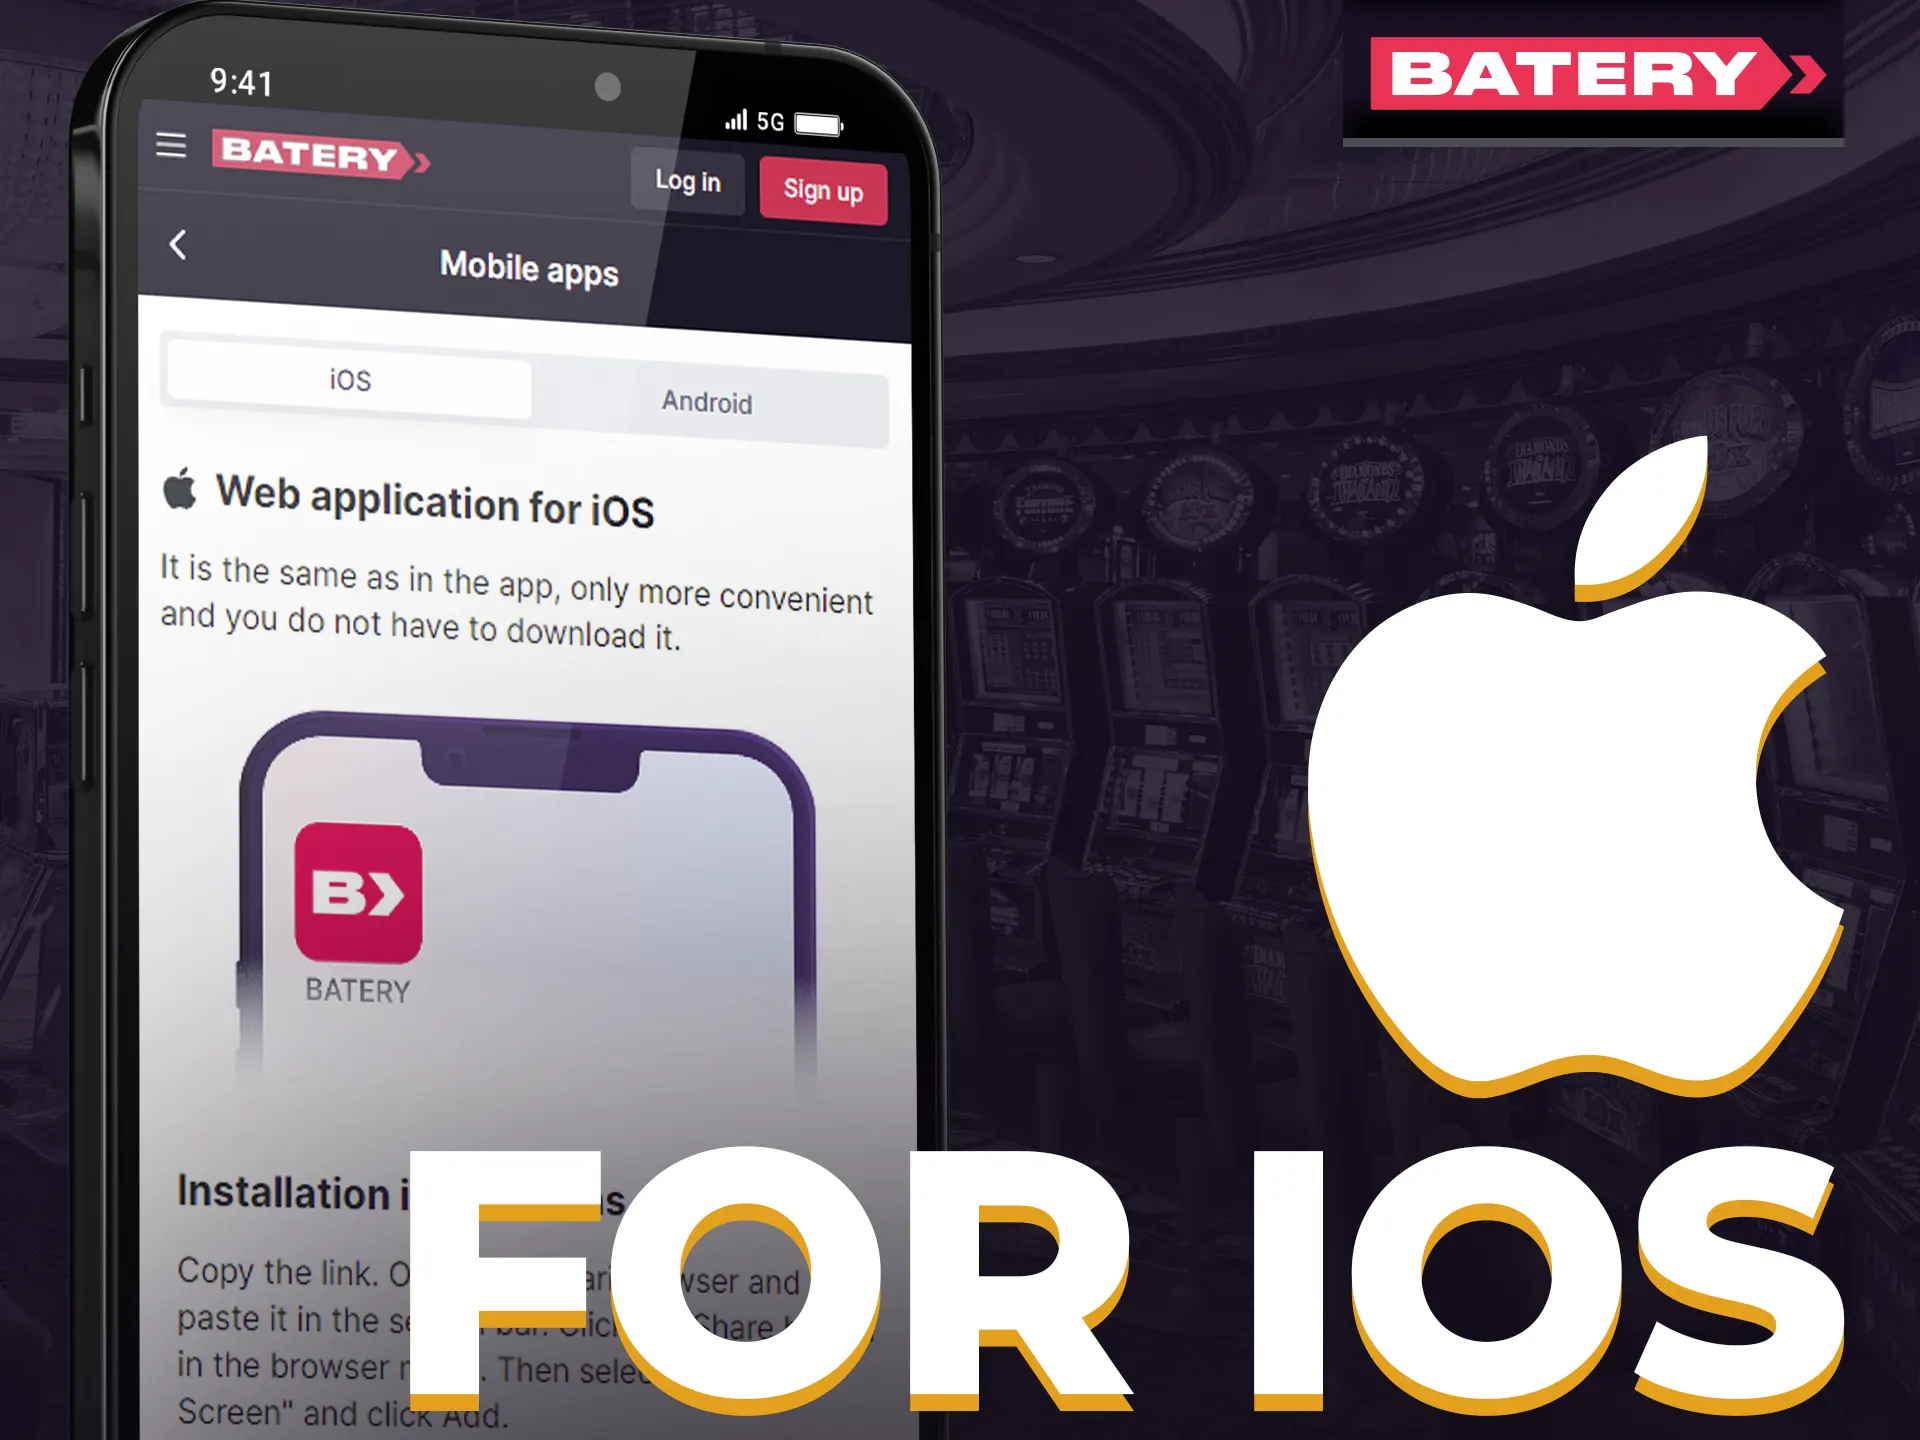 Install Batery iOS app via official marketplace once available.